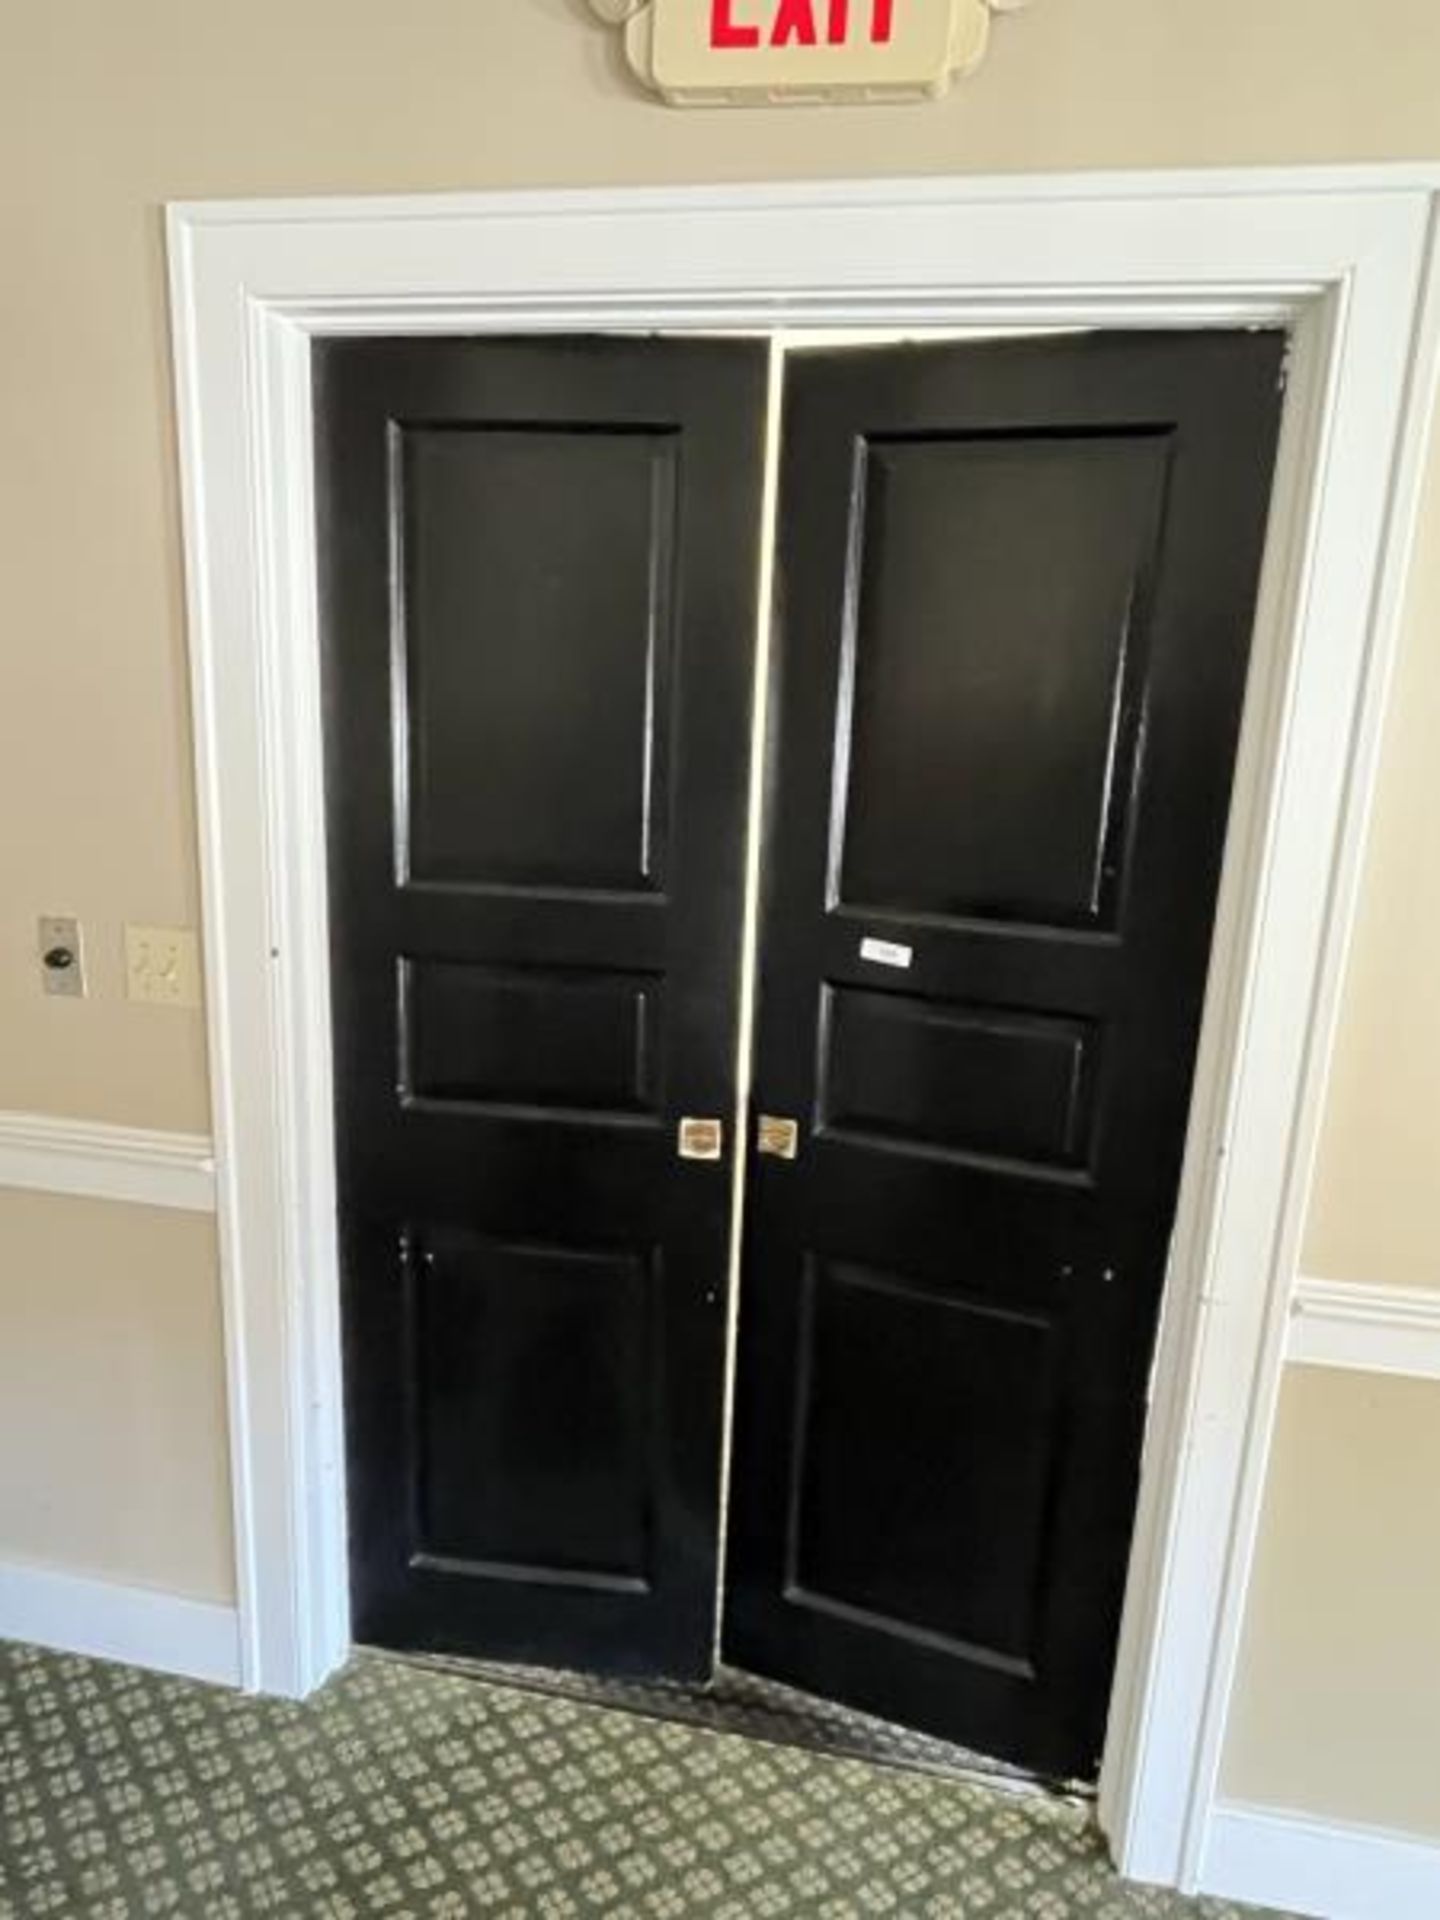 Single Set of Double Doors for a 4' Opening, Brass Hardware, 79.5" x 24" Each, Locaterd Upstairs - Image 2 of 3